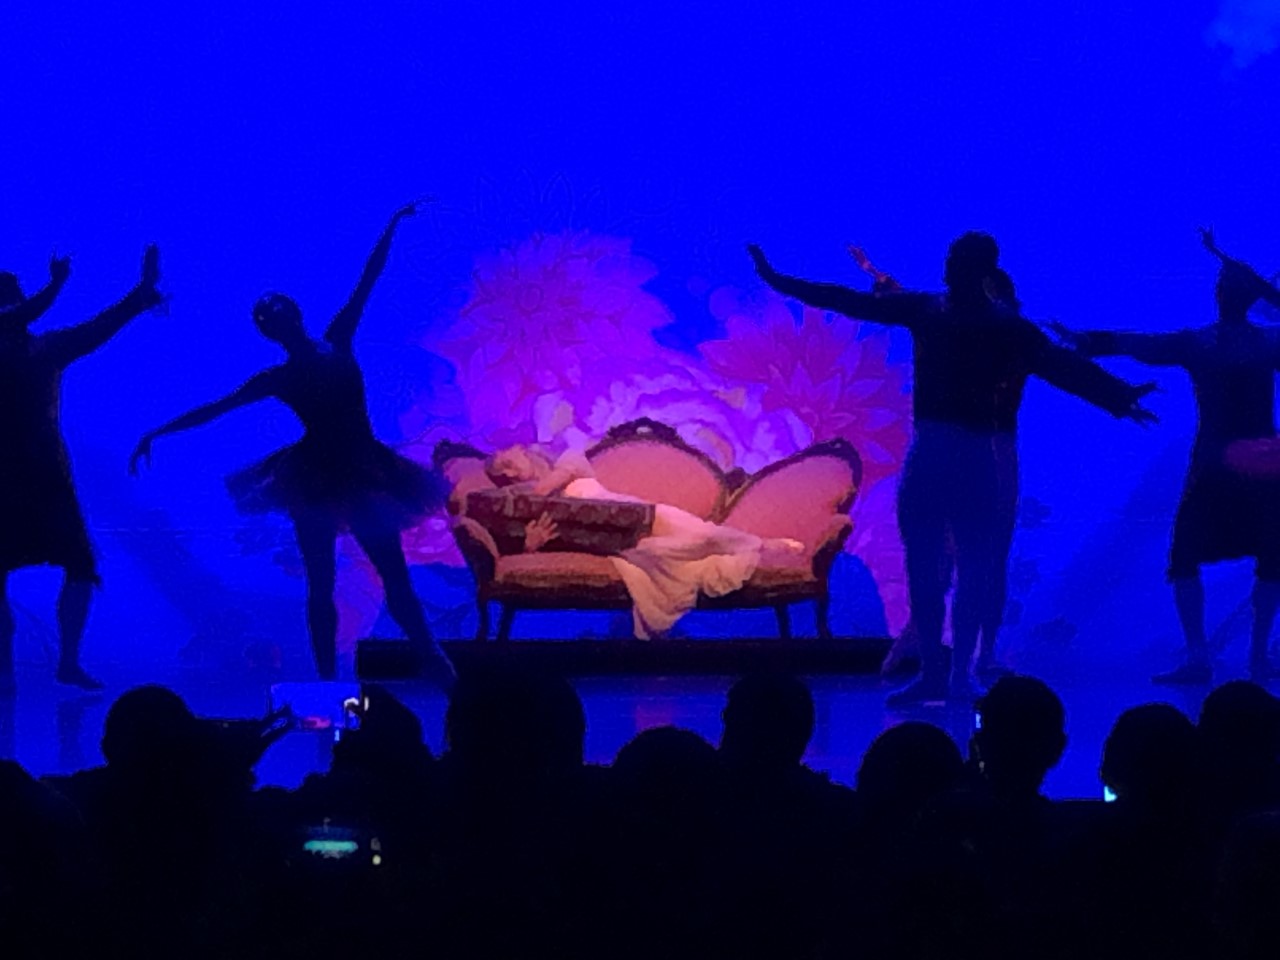 Dancers on stage surround another dancer on a couch during a performance of 